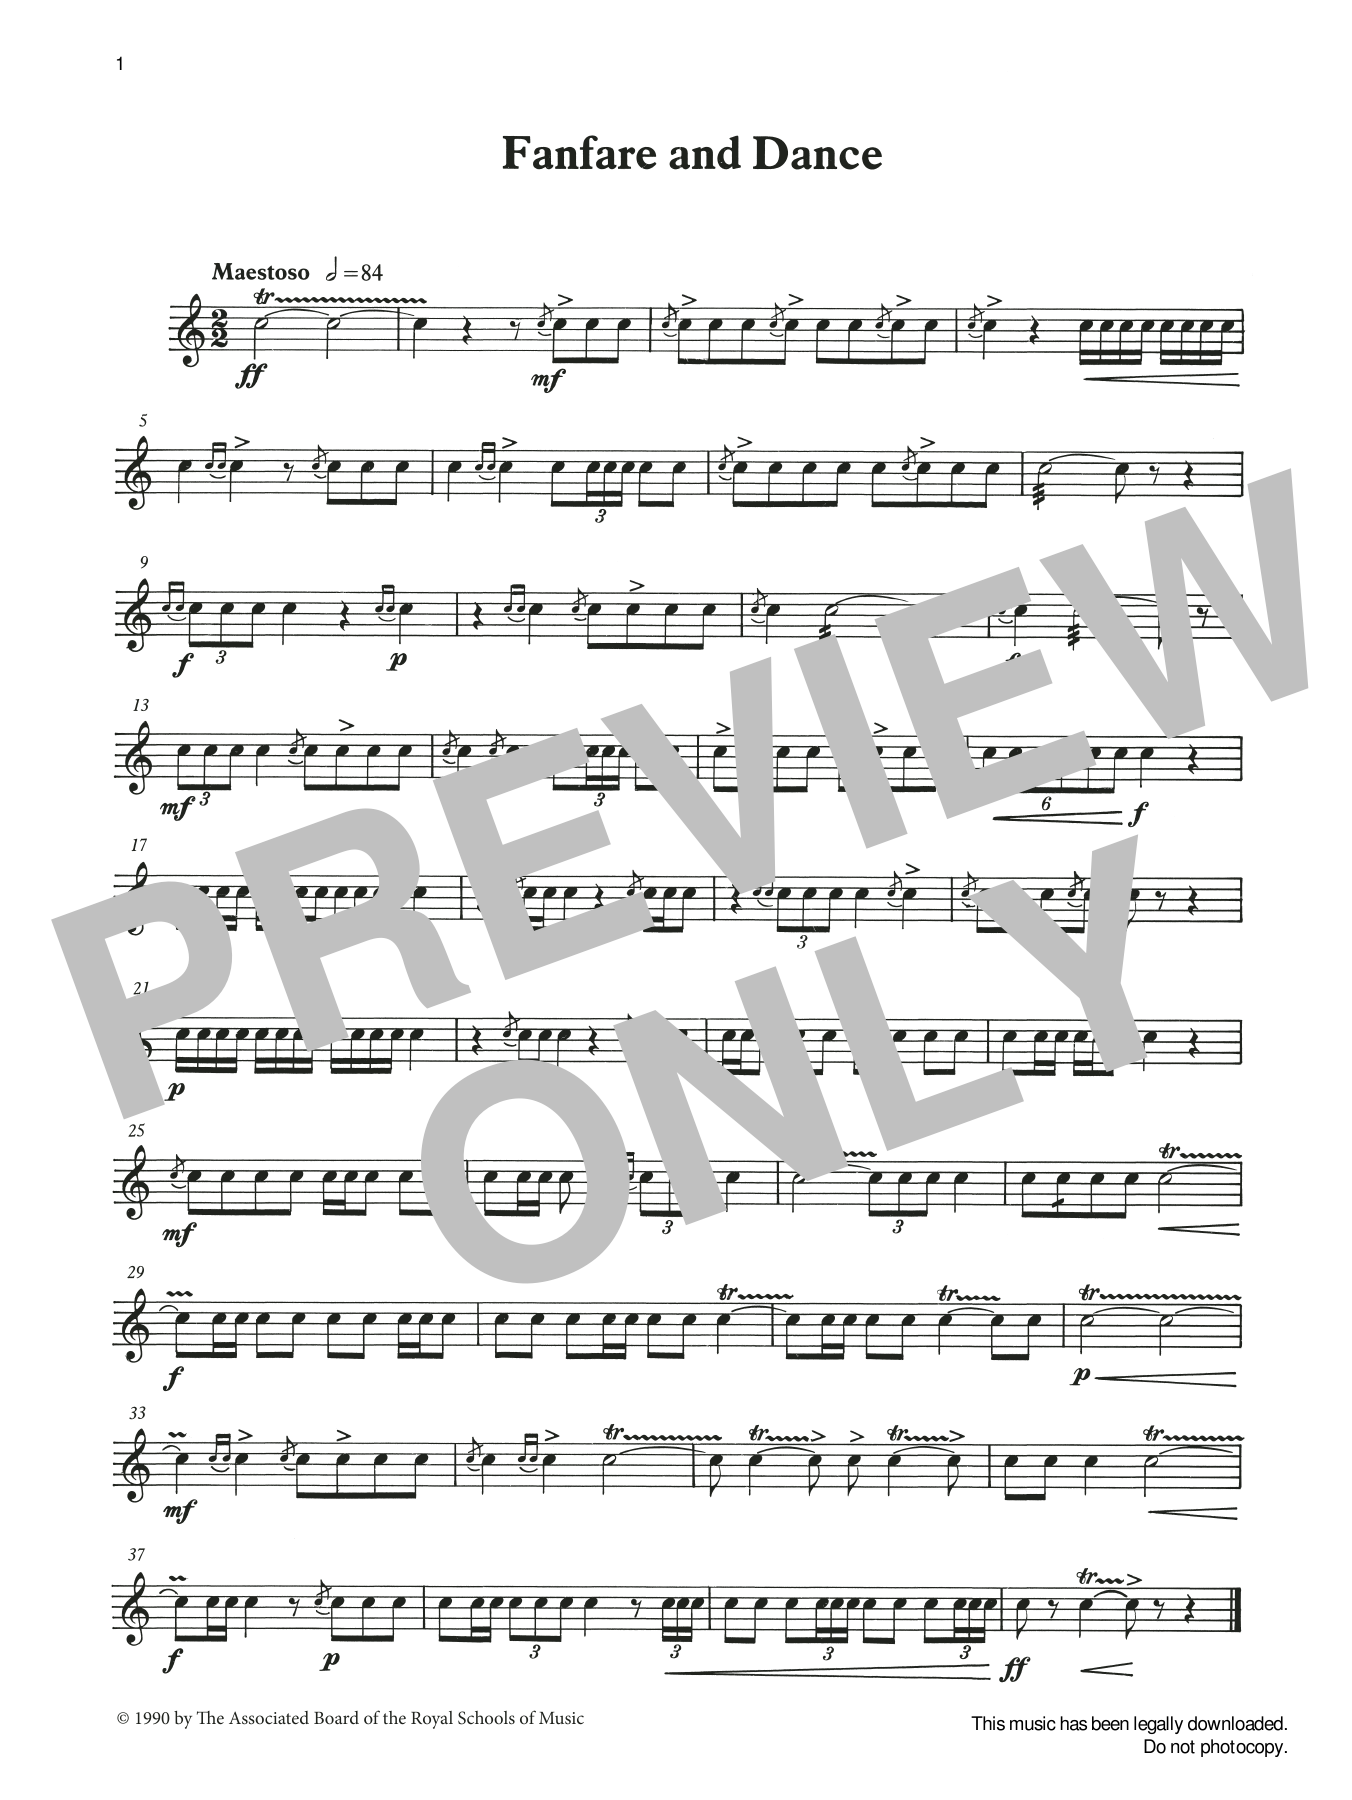 Download Ian Wright and Kevin Hathaway Fanfare and Dance from Graded Music for Sheet Music